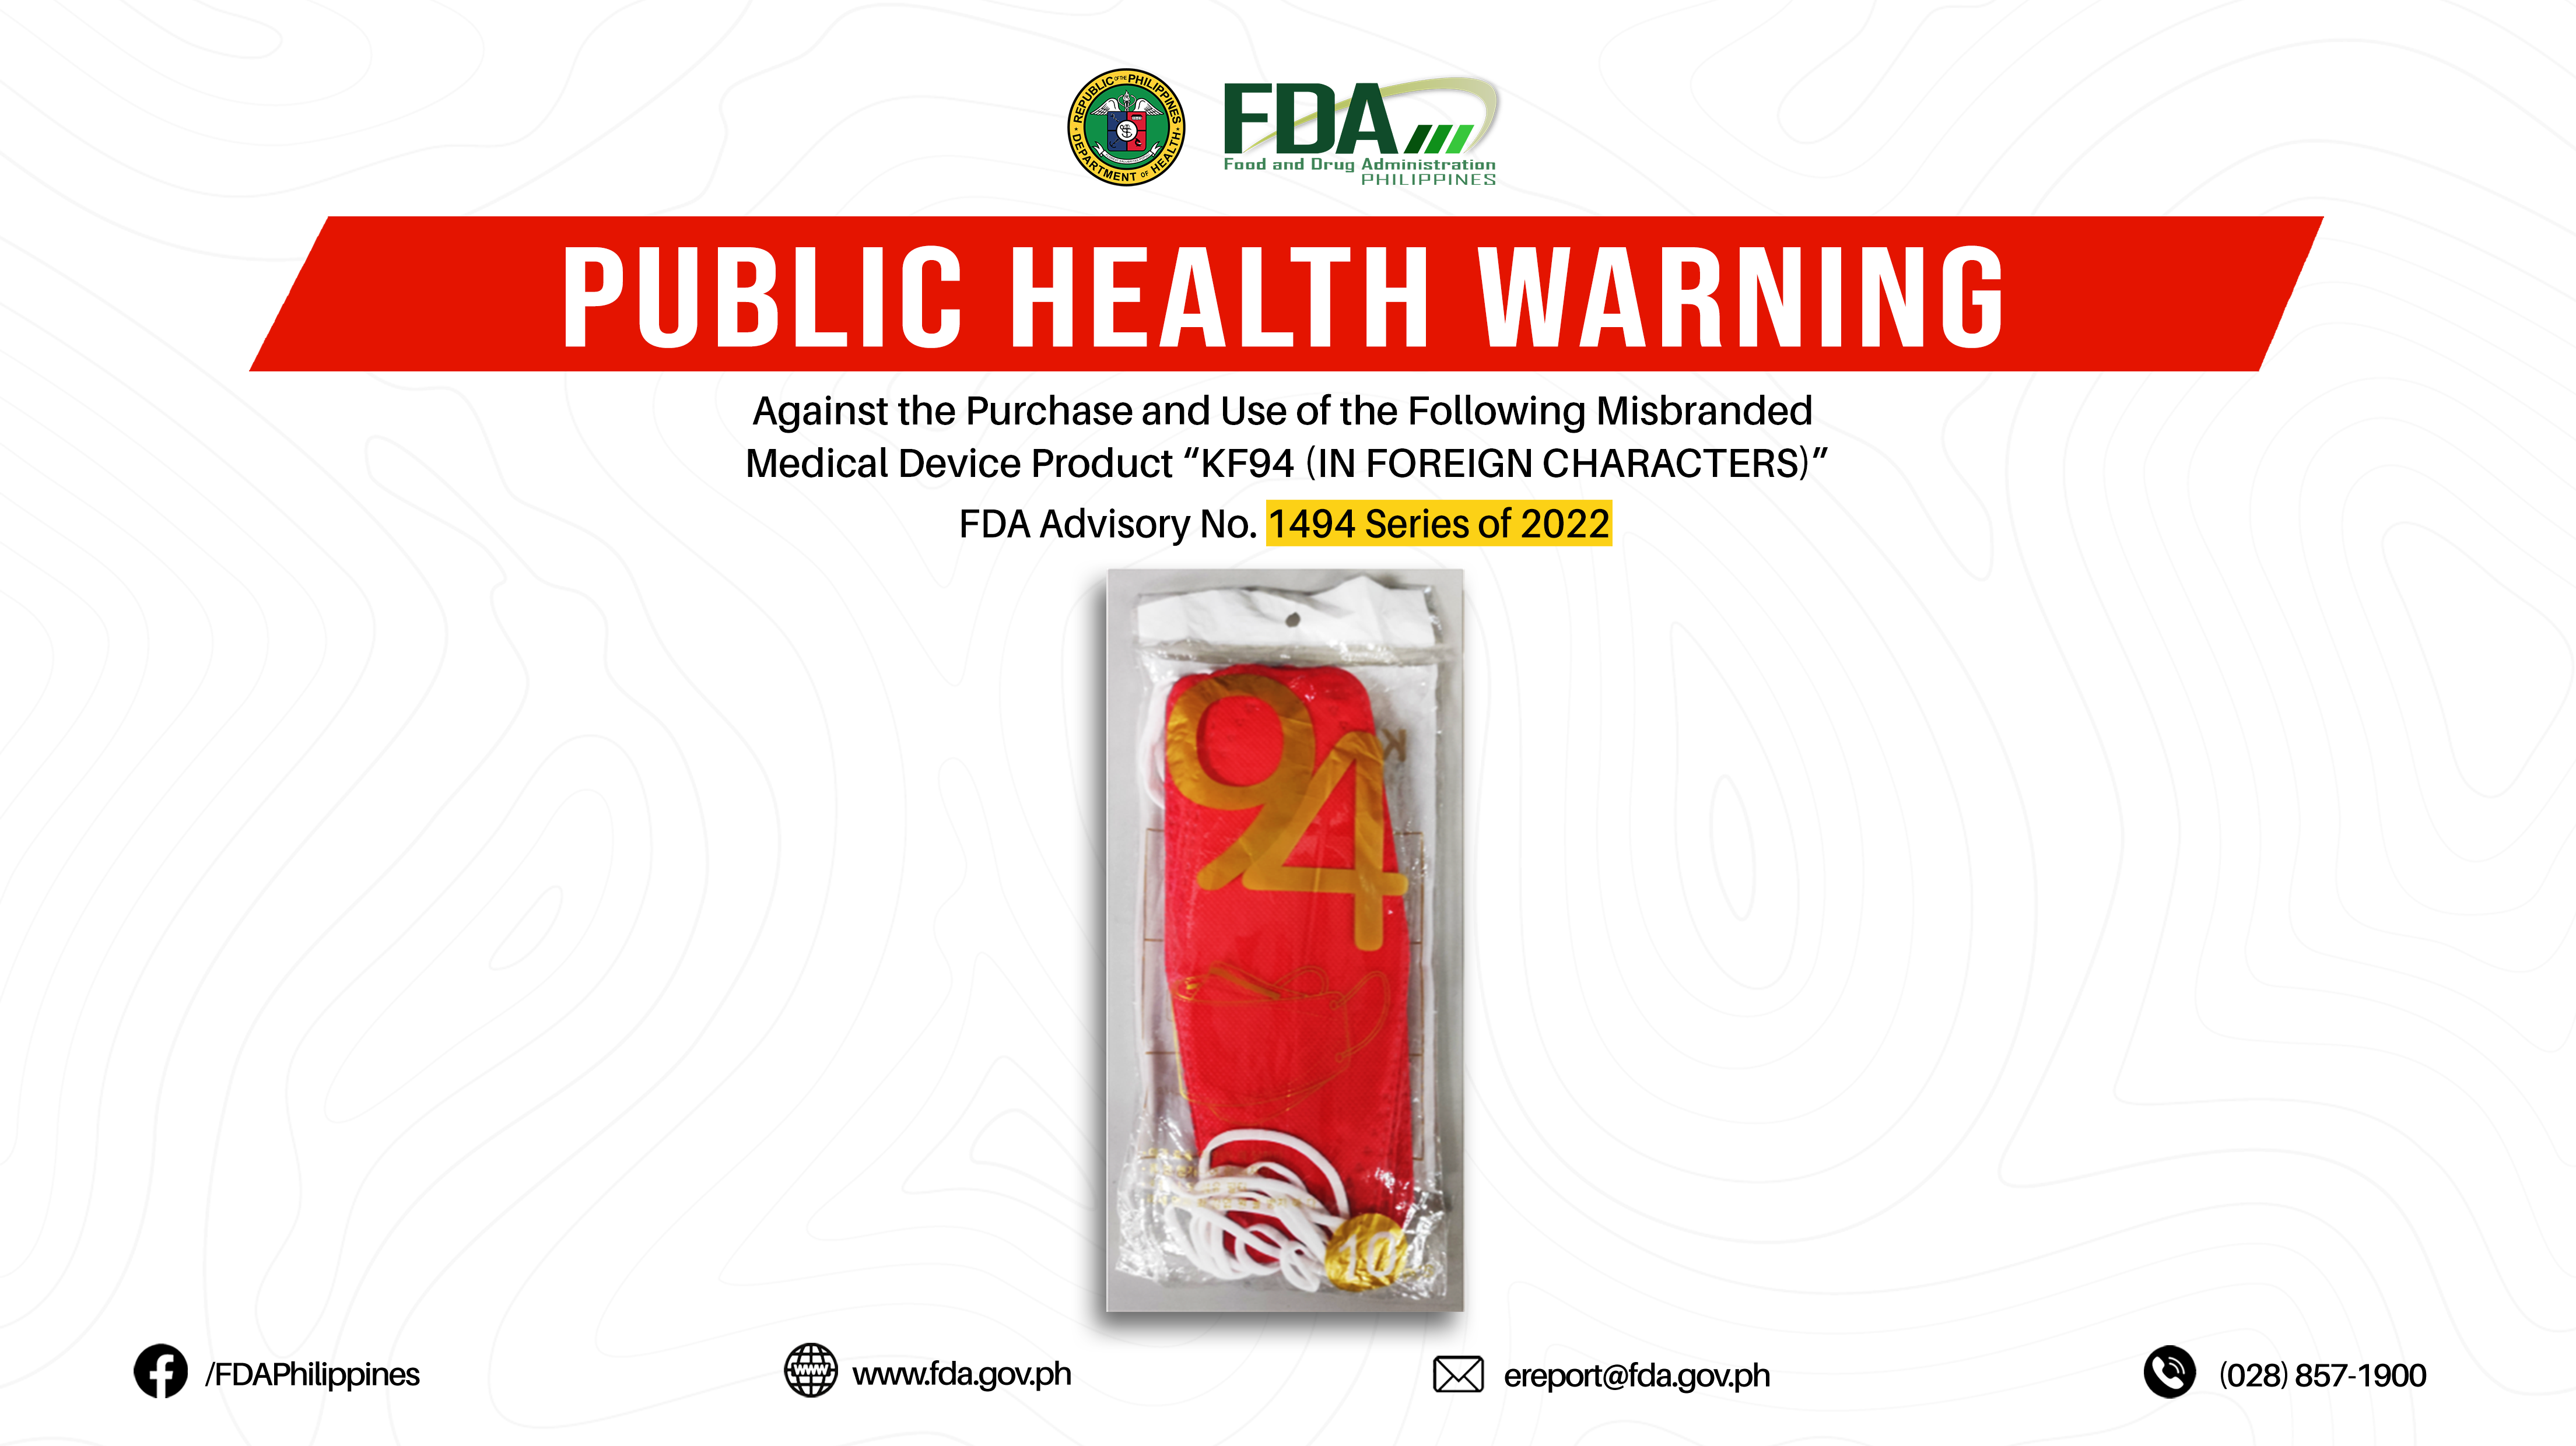 FDA Advisory No.2022-1494 || Public Health Warning Against the Purchase and Use of the Following Misbranded Medical Device Product “KF94 (IN FOREIGN CHARACTERS)”